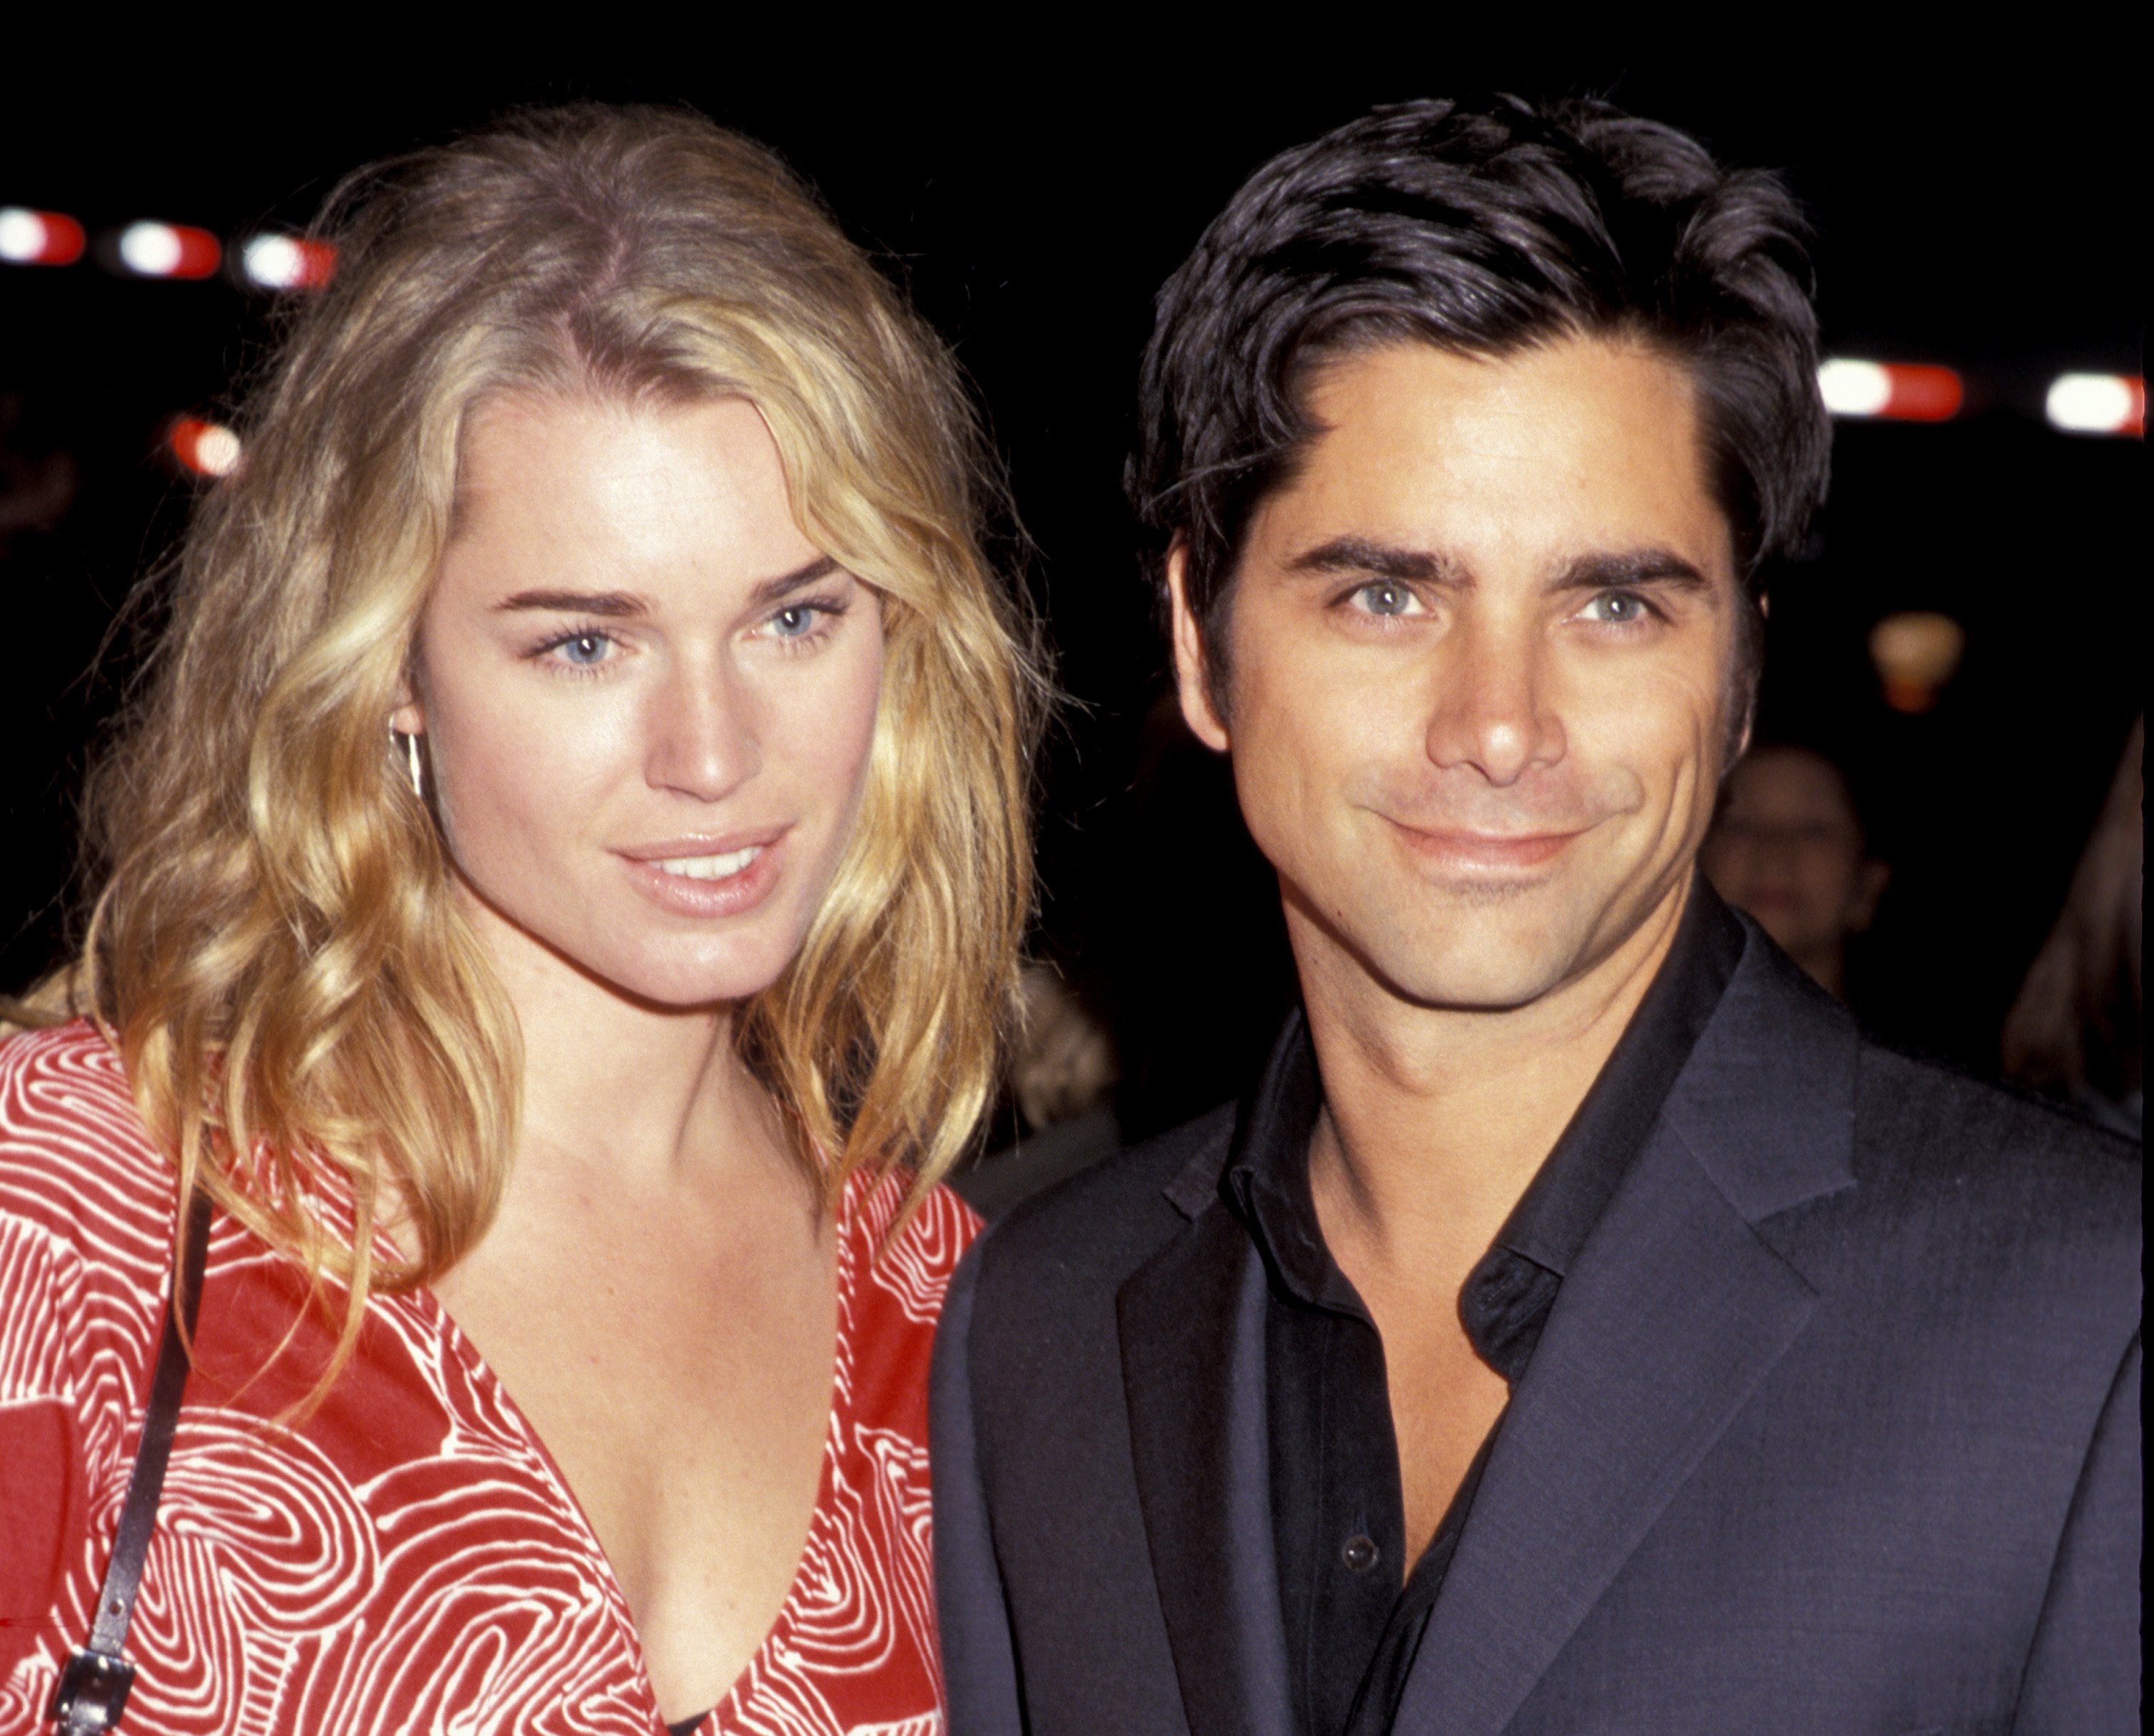 John Stamos and Rebecca Romijn during Opening of "Annie" - January 11, 1999 at New Amsterdam Theater in New York City, New York, United States | Source: Getty Images 